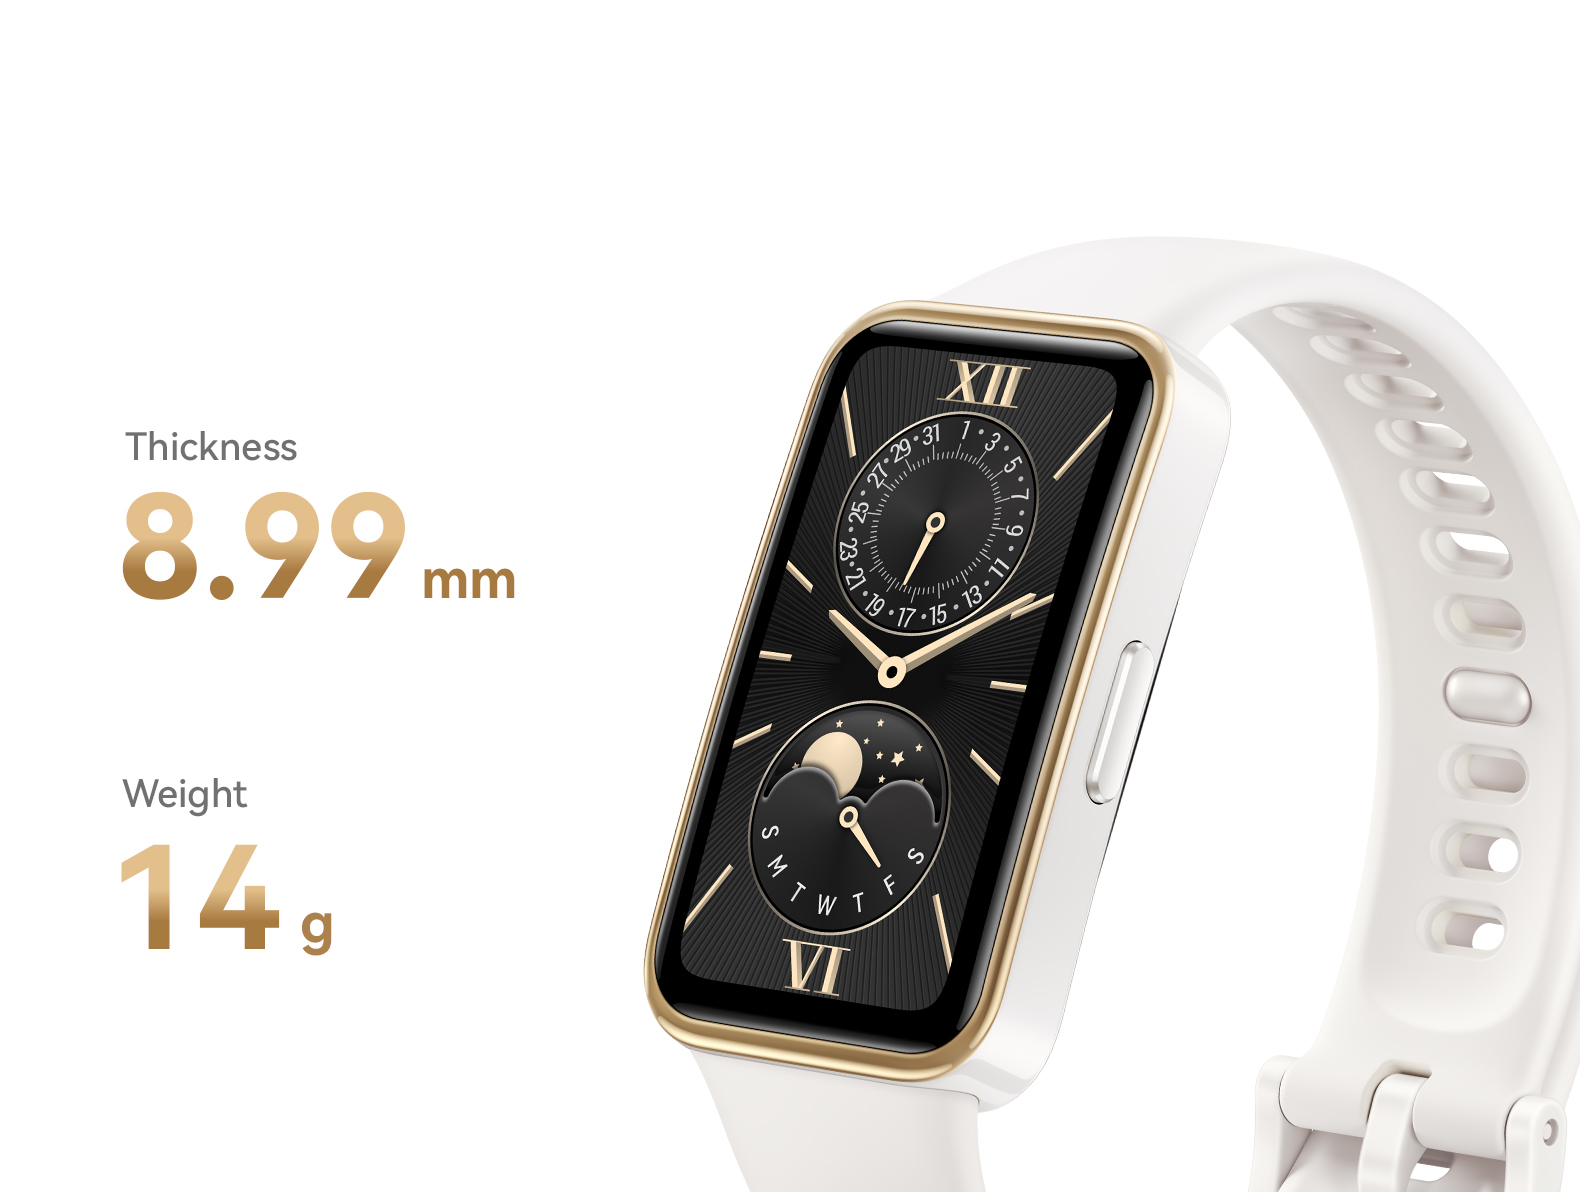 Huawei Band 9 Best Price in Pakistan.